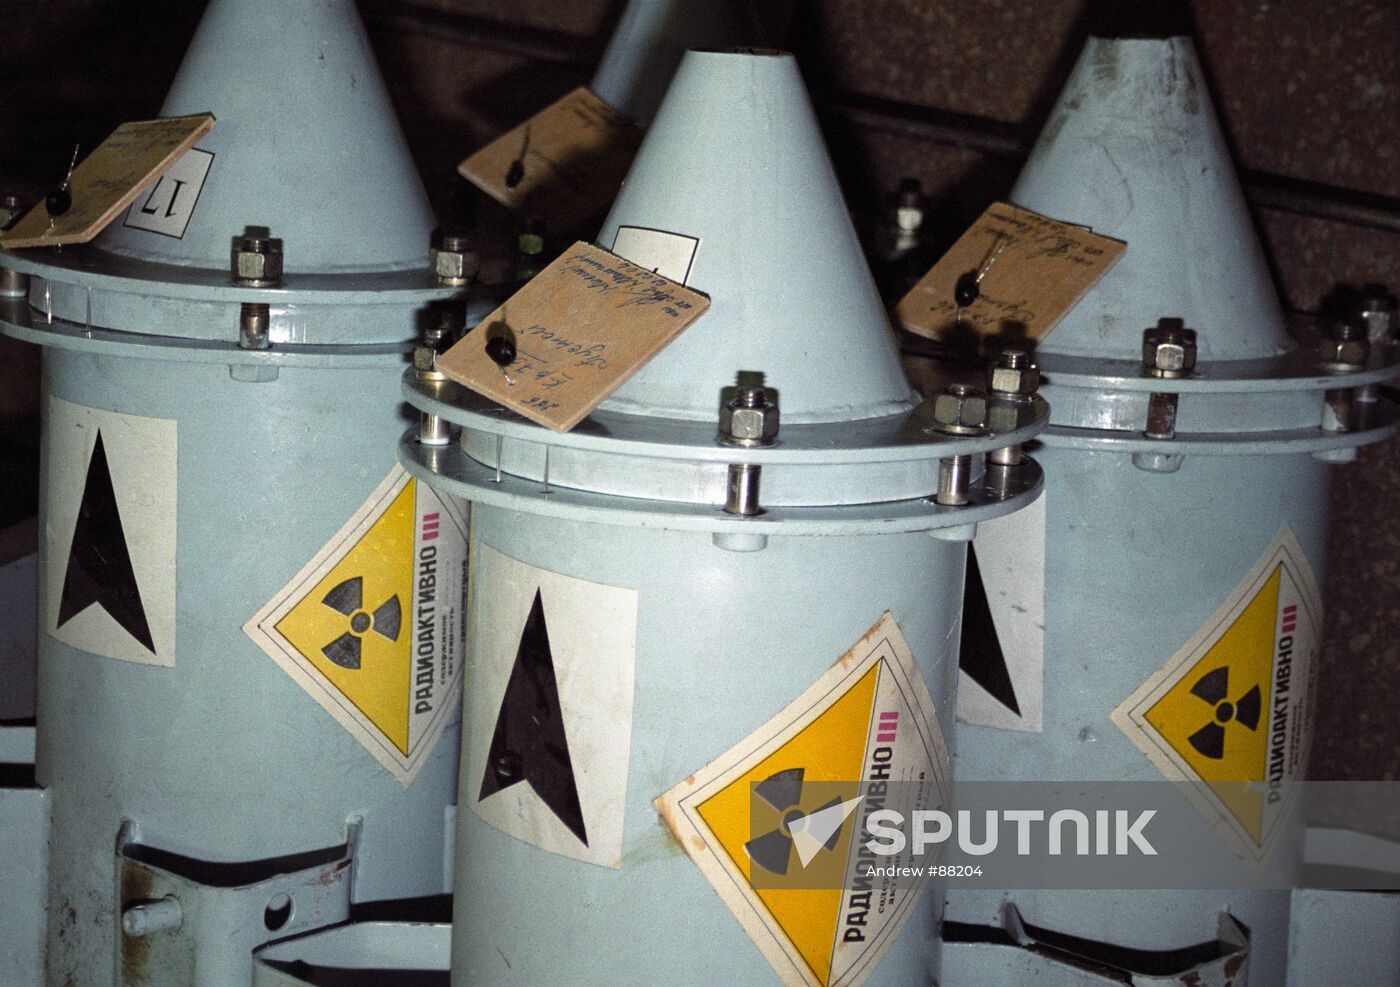 Nuclear fuel containers